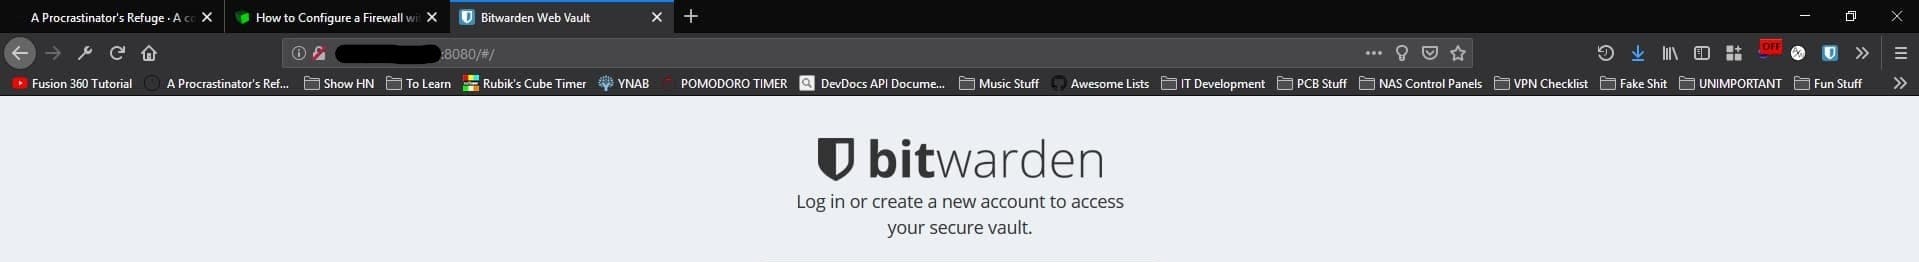 Picture of Bitwarden loading even with the firewall on.